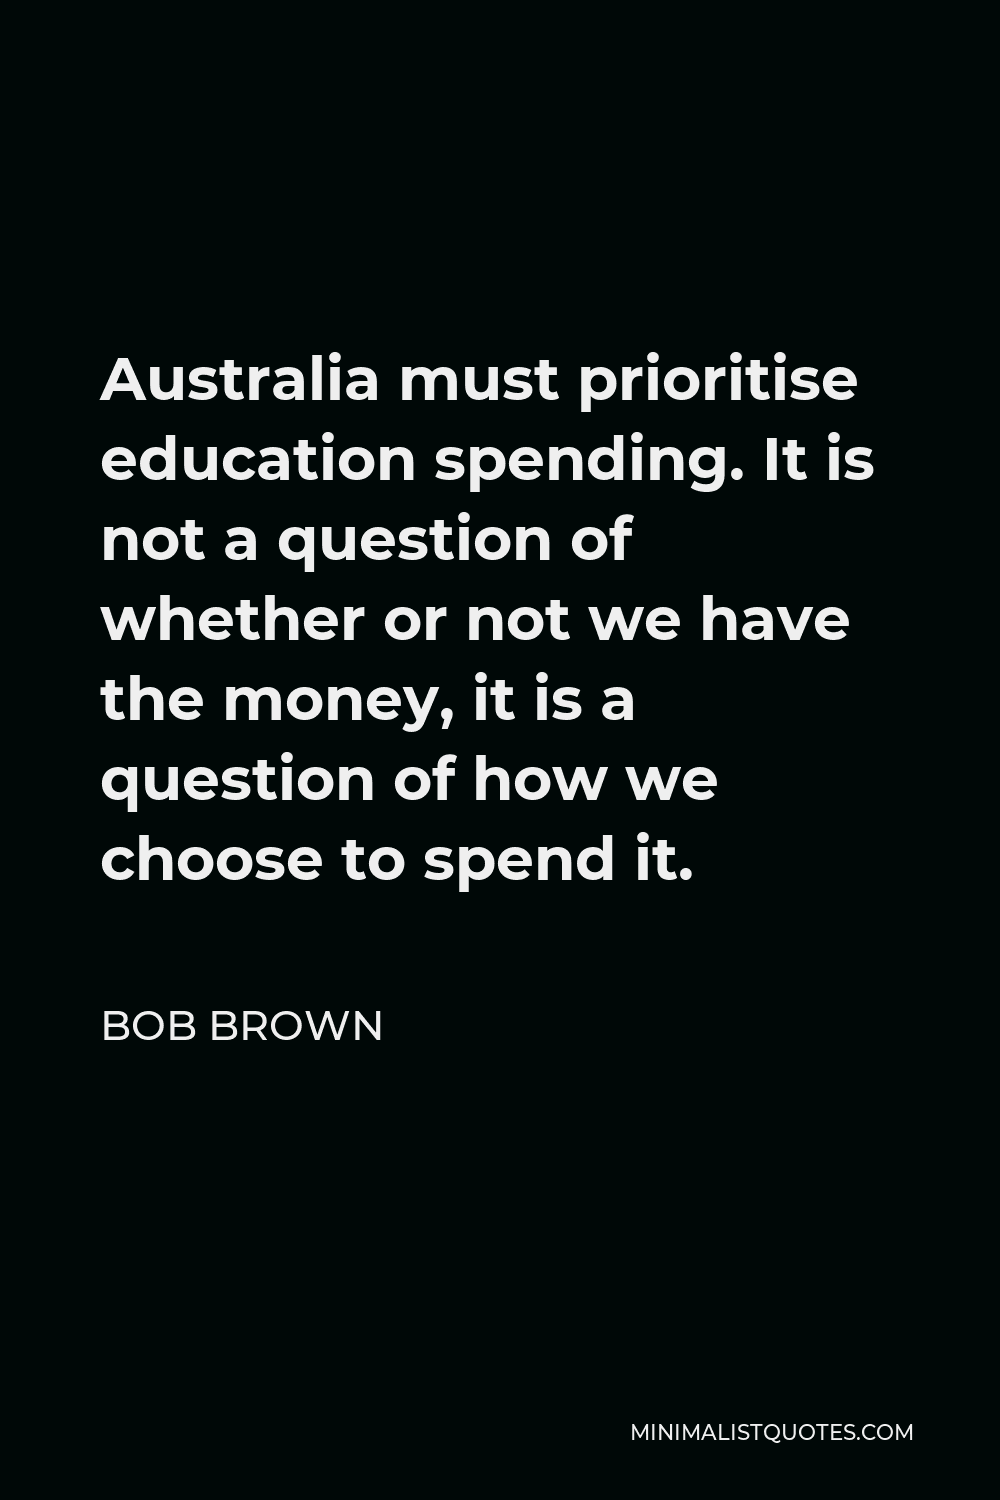 Bob Brown Quote - Australia must prioritise education spending. It is not a question of whether or not we have the money, it is a question of how we choose to spend it.